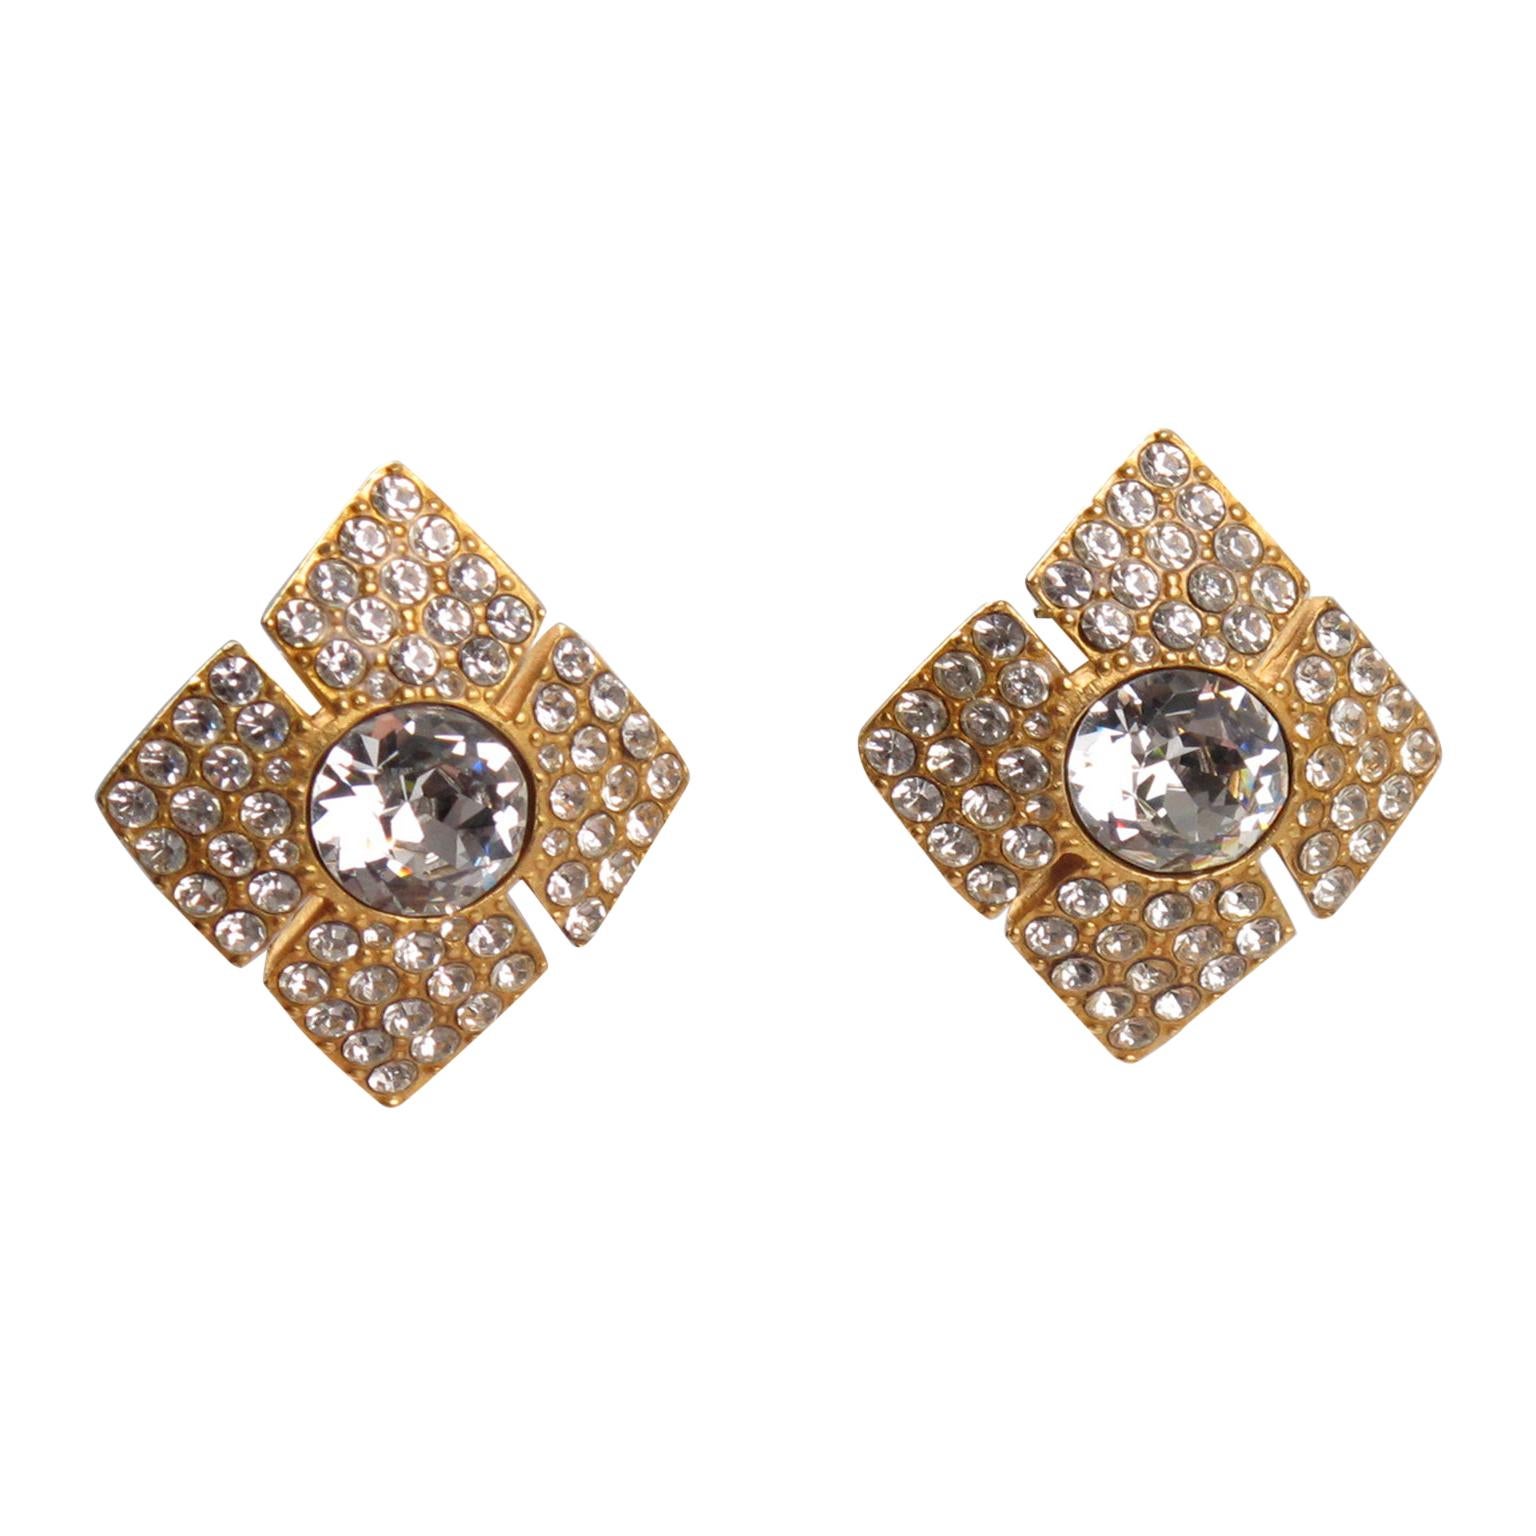 Christian Dior Diamond-Shaped Jeweled Clip Earrings In Excellent Condition For Sale In Atlanta, GA